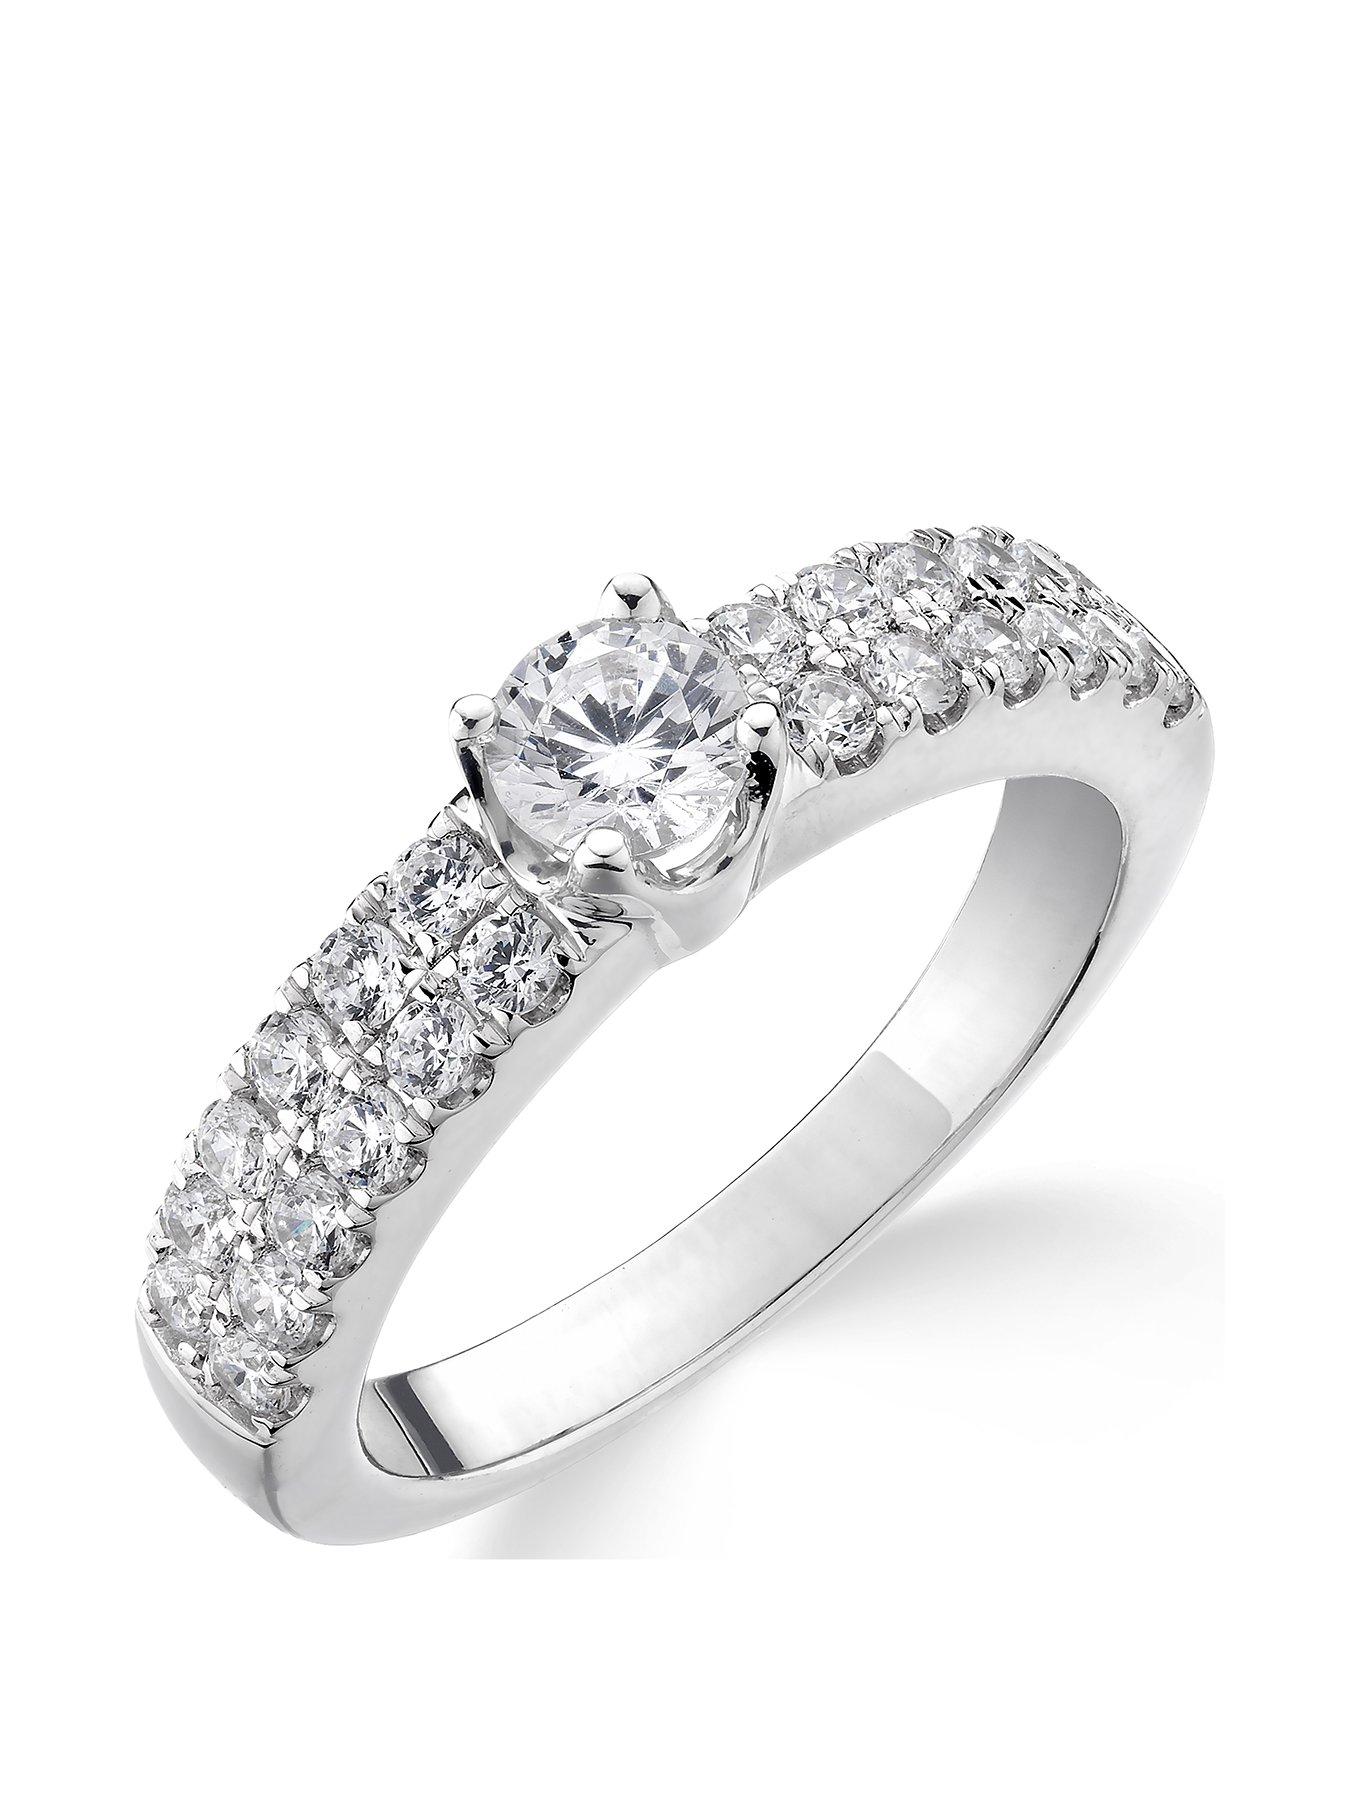  9ct White Gold 1ct Two-Row Diamond Solitaire Ring with Set Shoulders